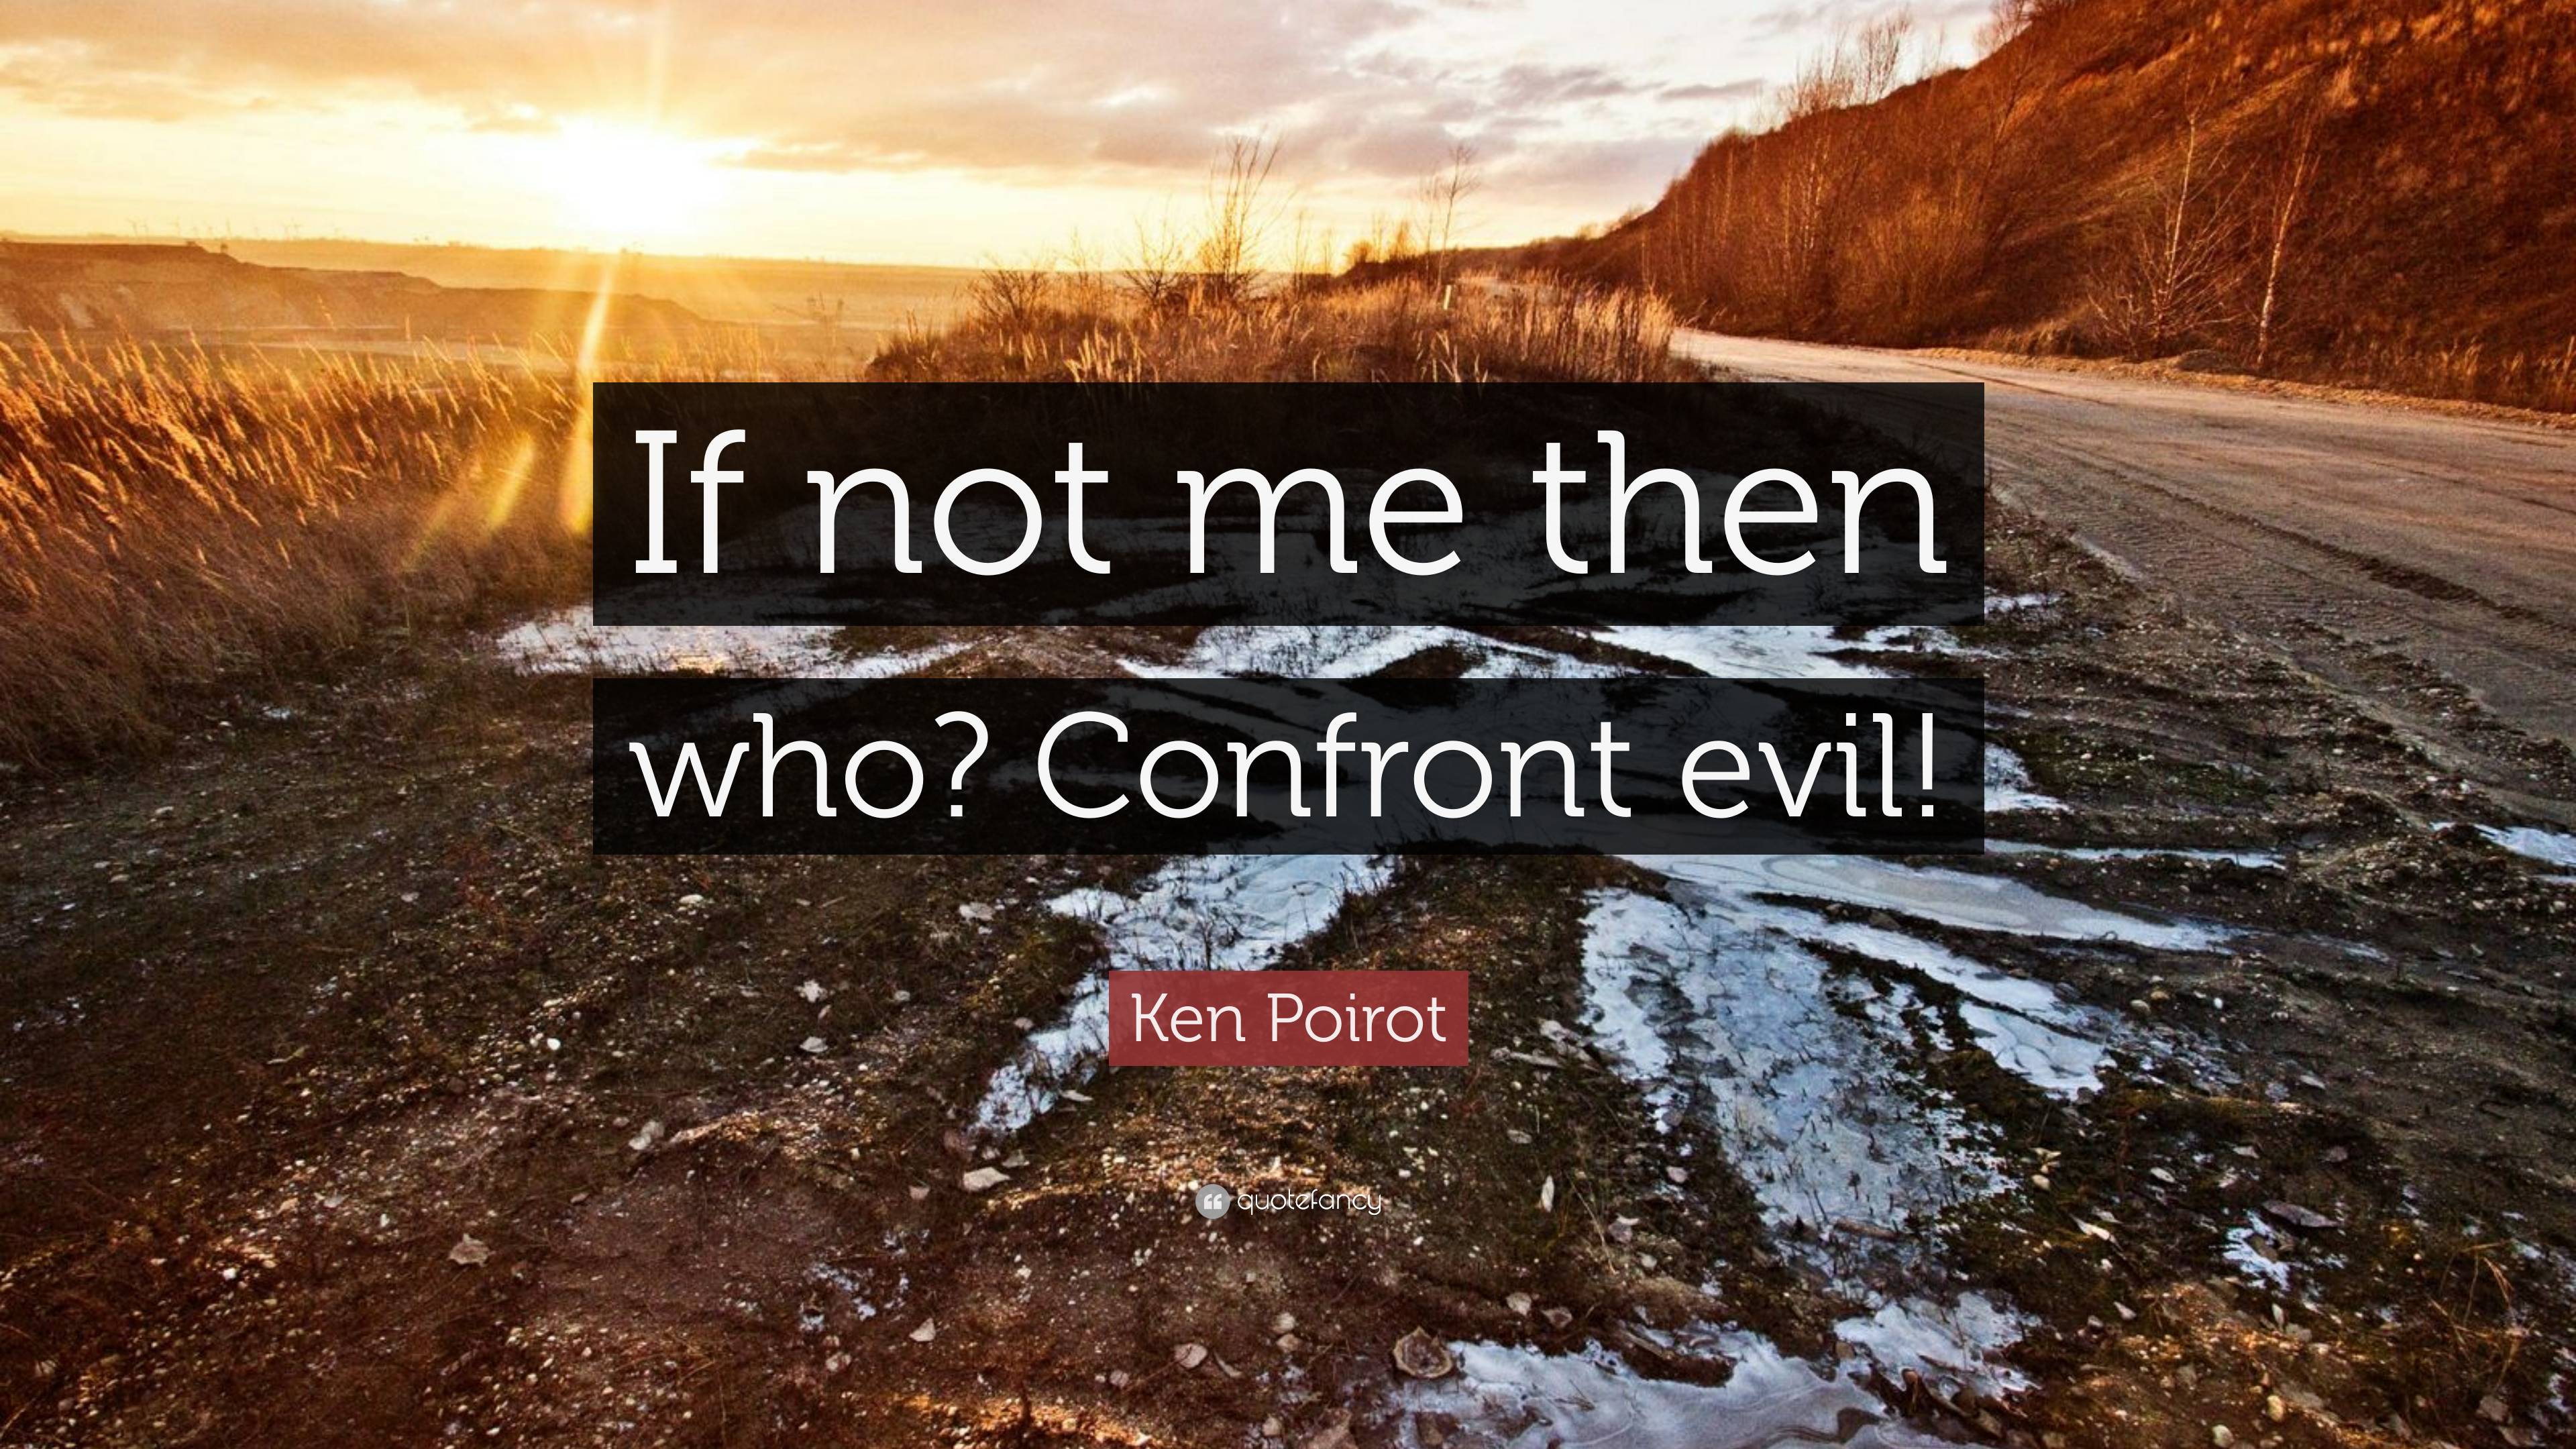 Ken Poirot Quote “If not me then who? Confront evil!”